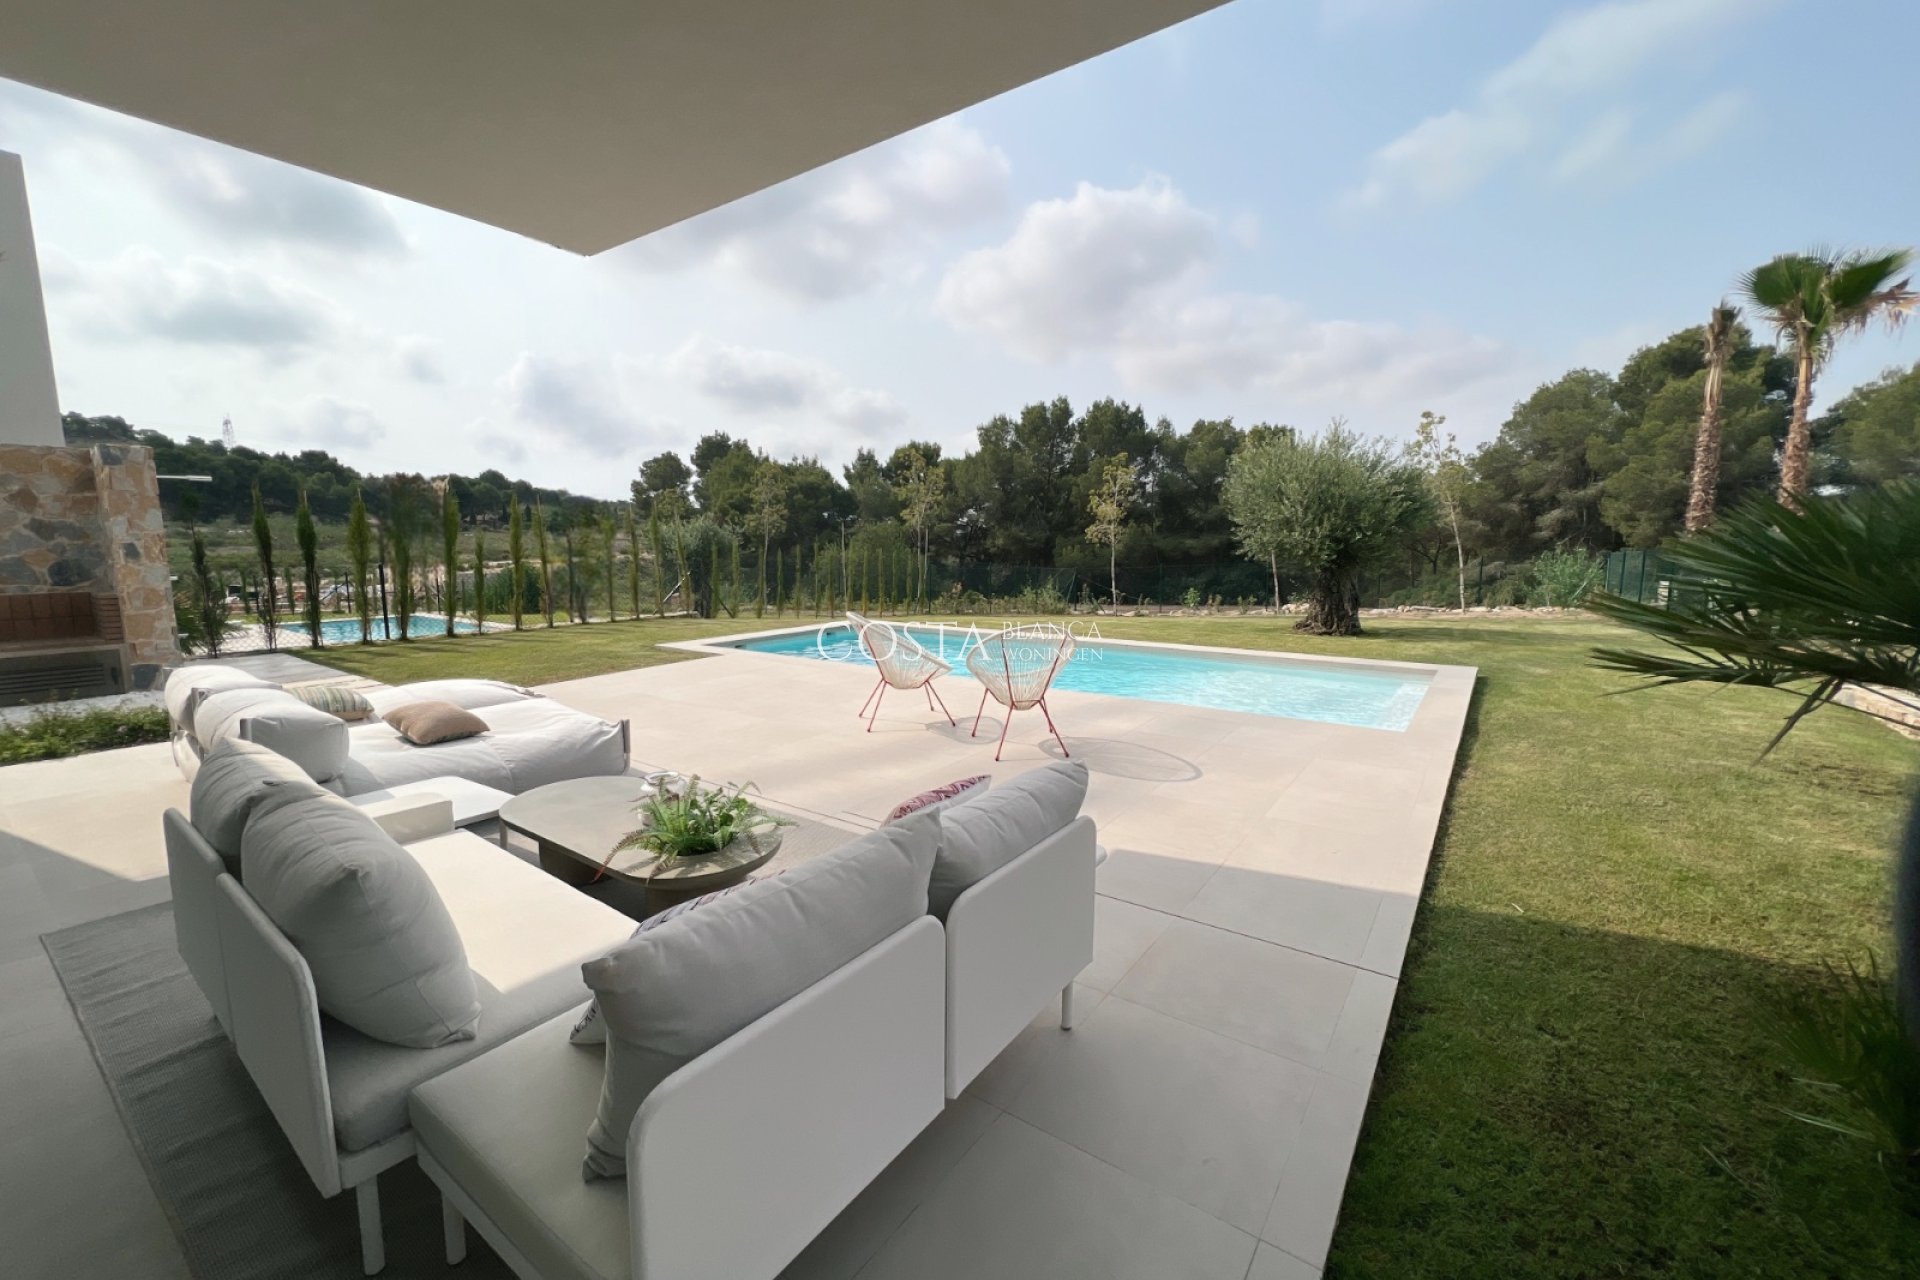 Nowy budynek - Willa -
Las Colinas Golf and Country Club